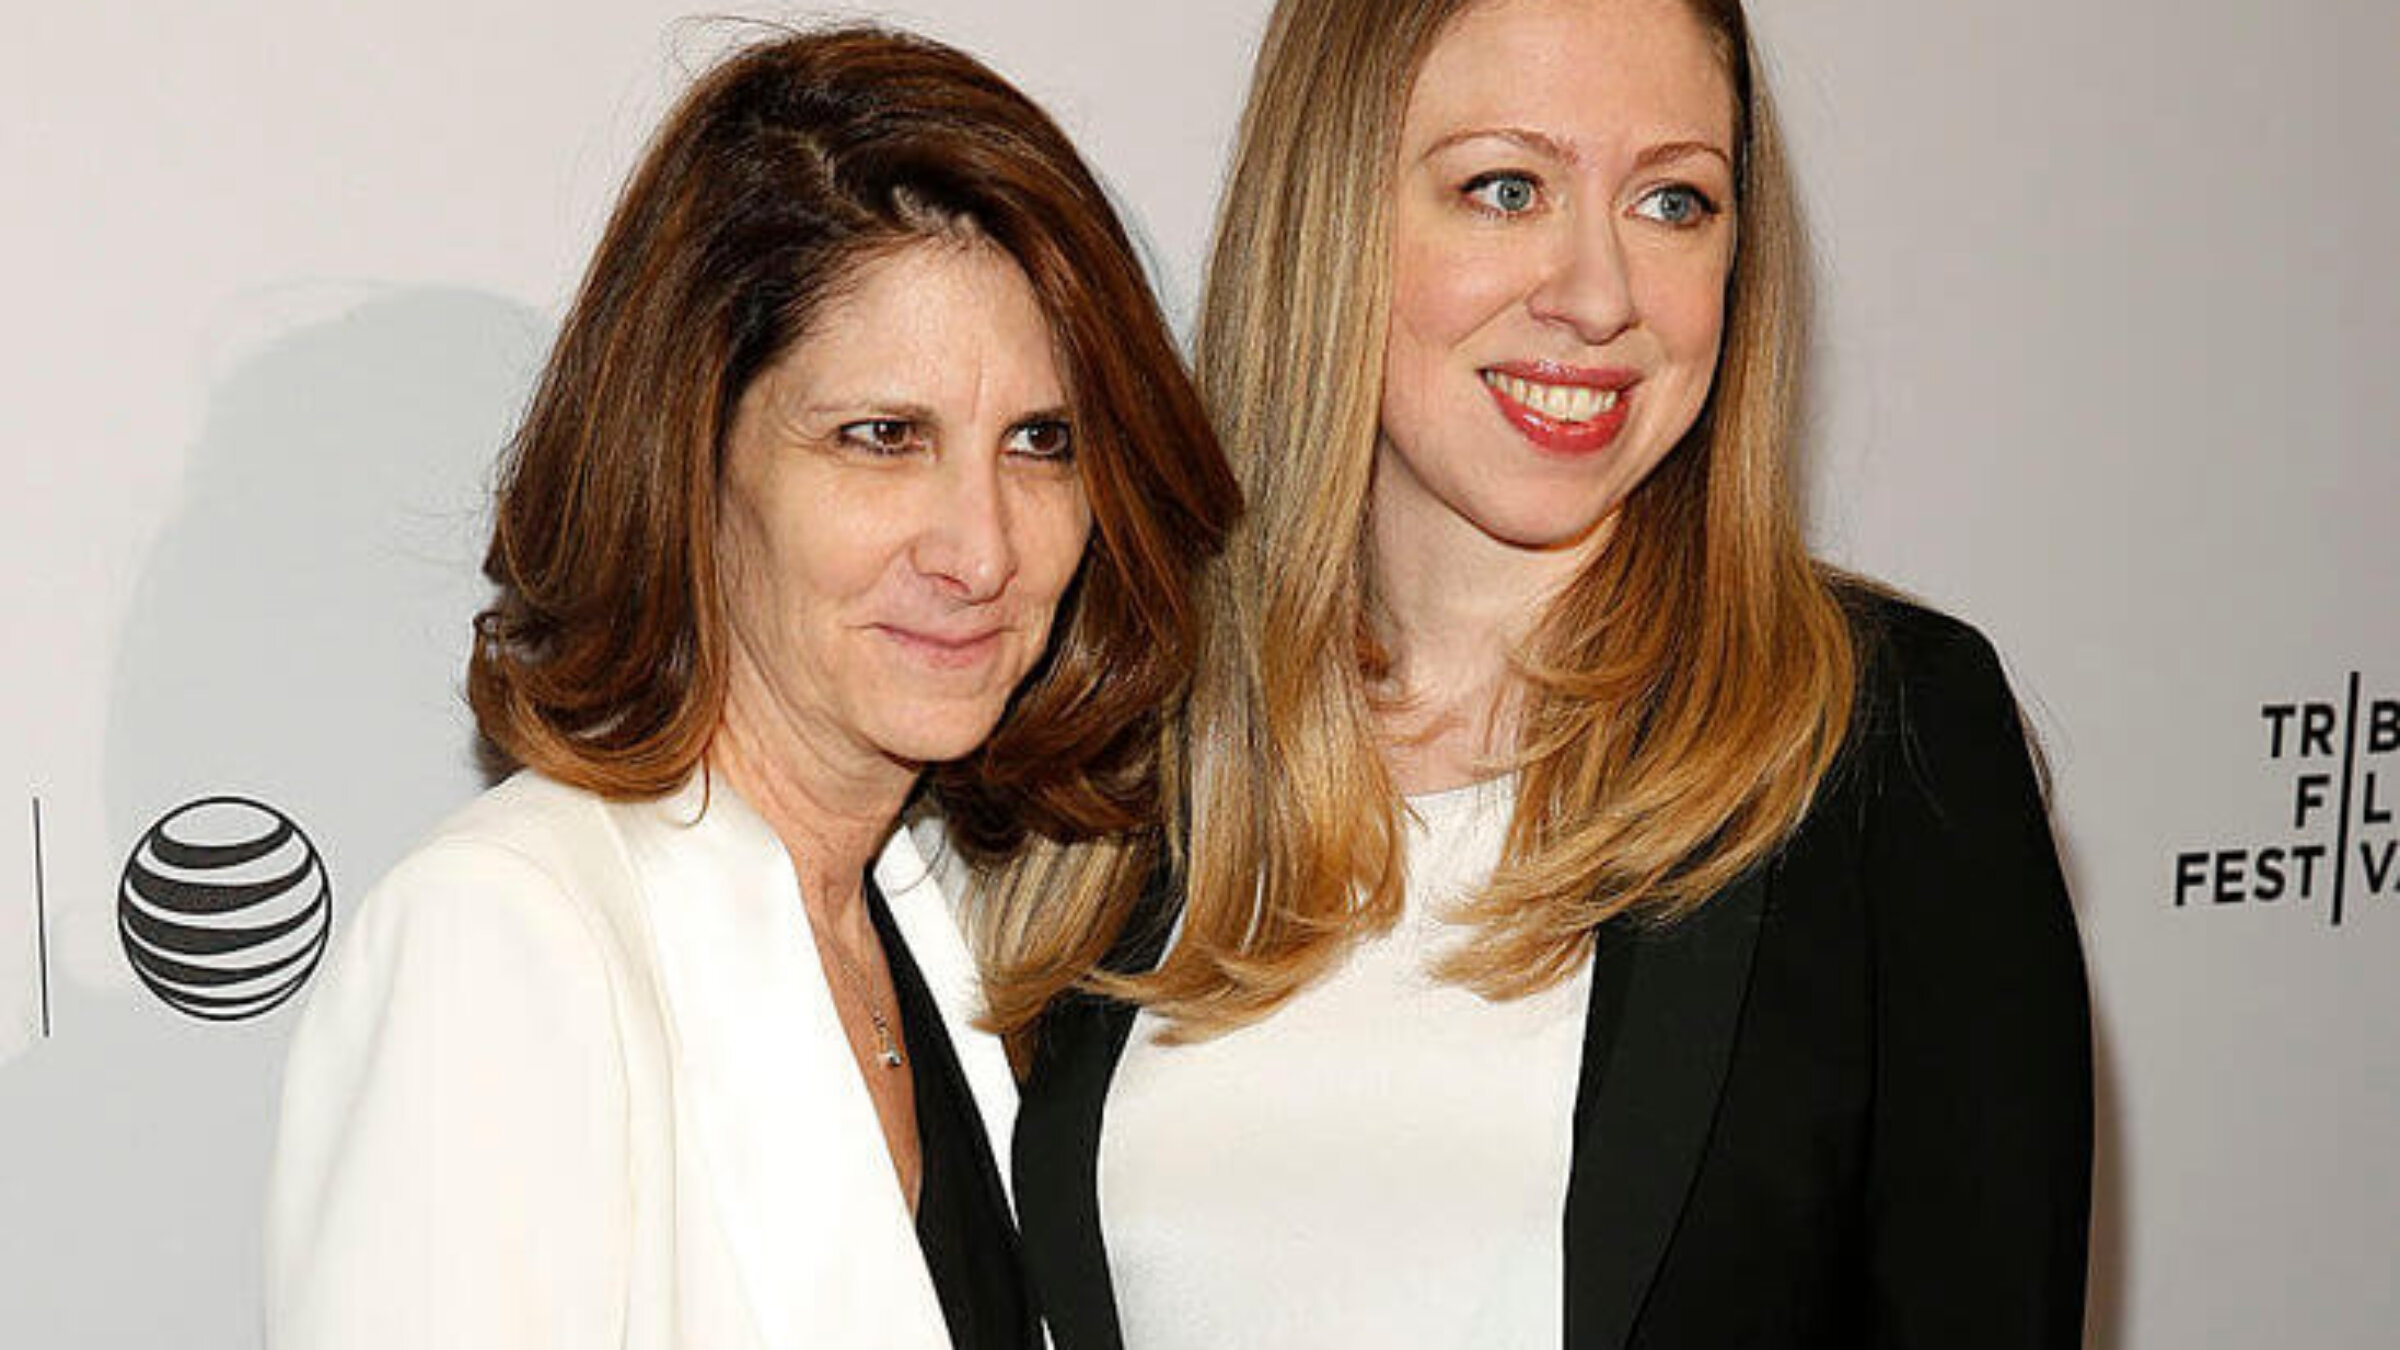 NYU's next president, Linda G. Mills, who is also a filmmaker, pictured here with Chelsea Clinton during the 2014 Tribeca Film Festival in New York City.  